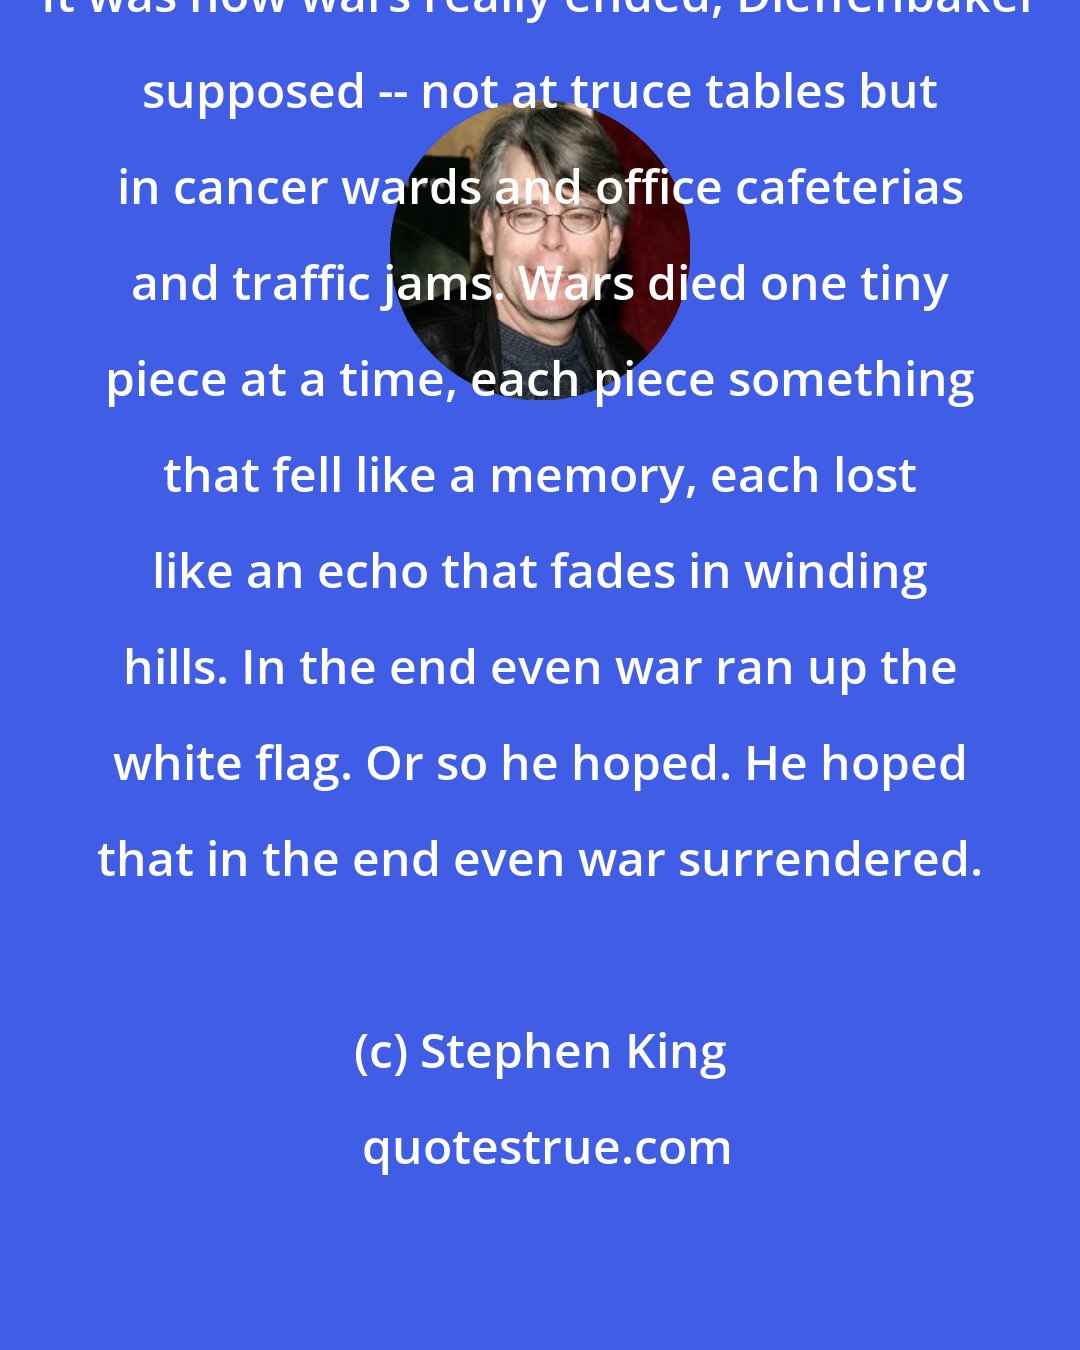 Stephen King: It was how wars really ended, Dieffenbaker supposed -- not at truce tables but in cancer wards and office cafeterias and traffic jams. Wars died one tiny piece at a time, each piece something that fell like a memory, each lost like an echo that fades in winding hills. In the end even war ran up the white flag. Or so he hoped. He hoped that in the end even war surrendered.